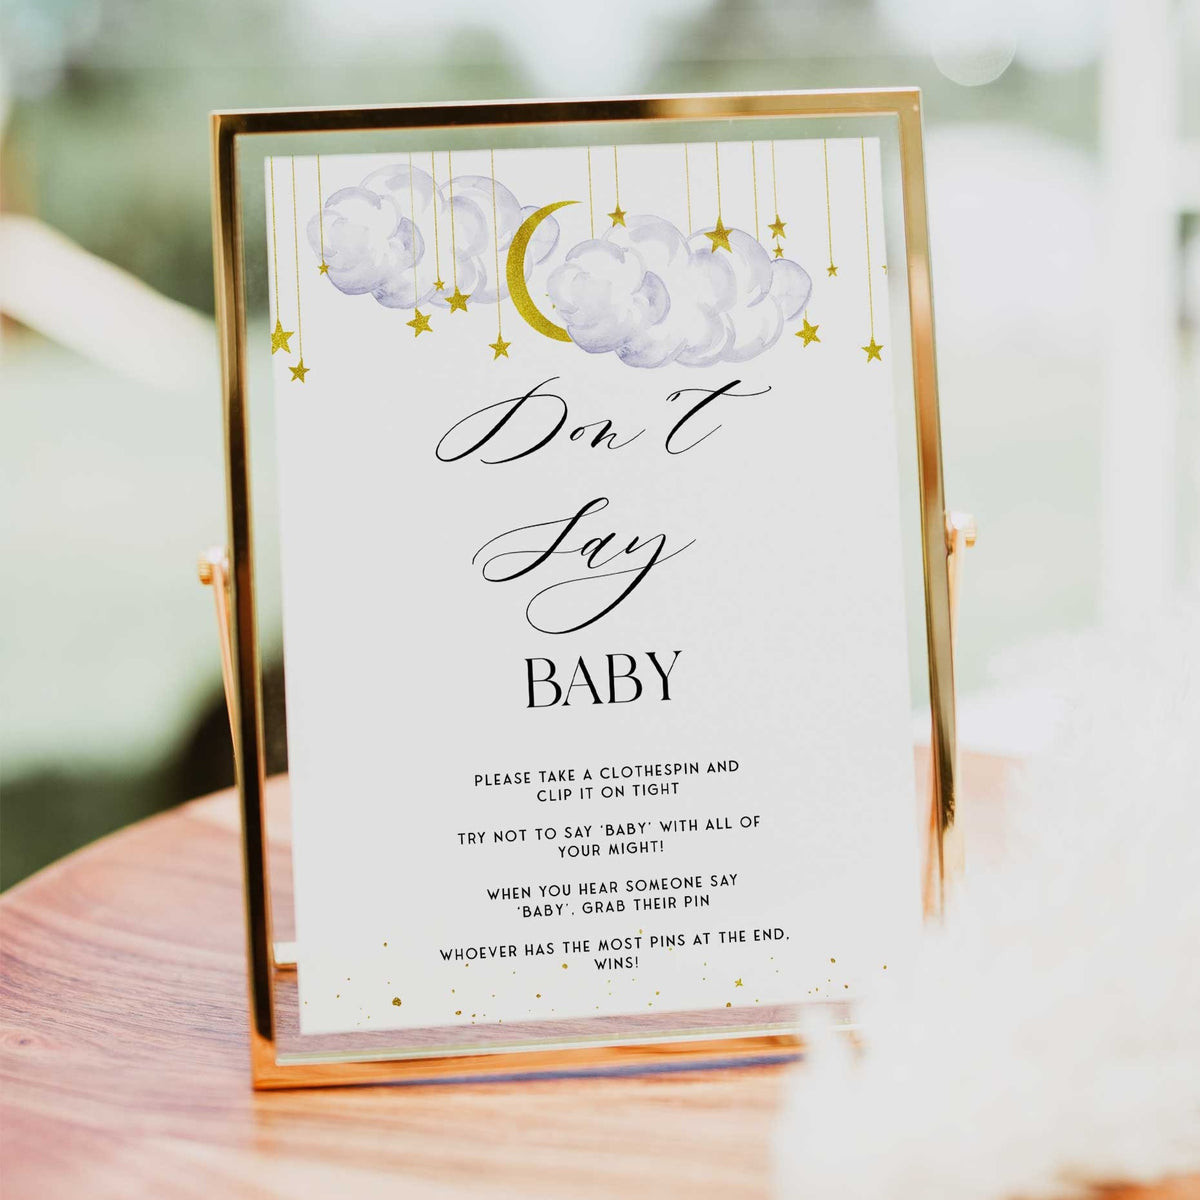 Fully editable and printable baby shower don't say baby game with a little star design. Perfect for a Twinkle Little Star baby shower themed party